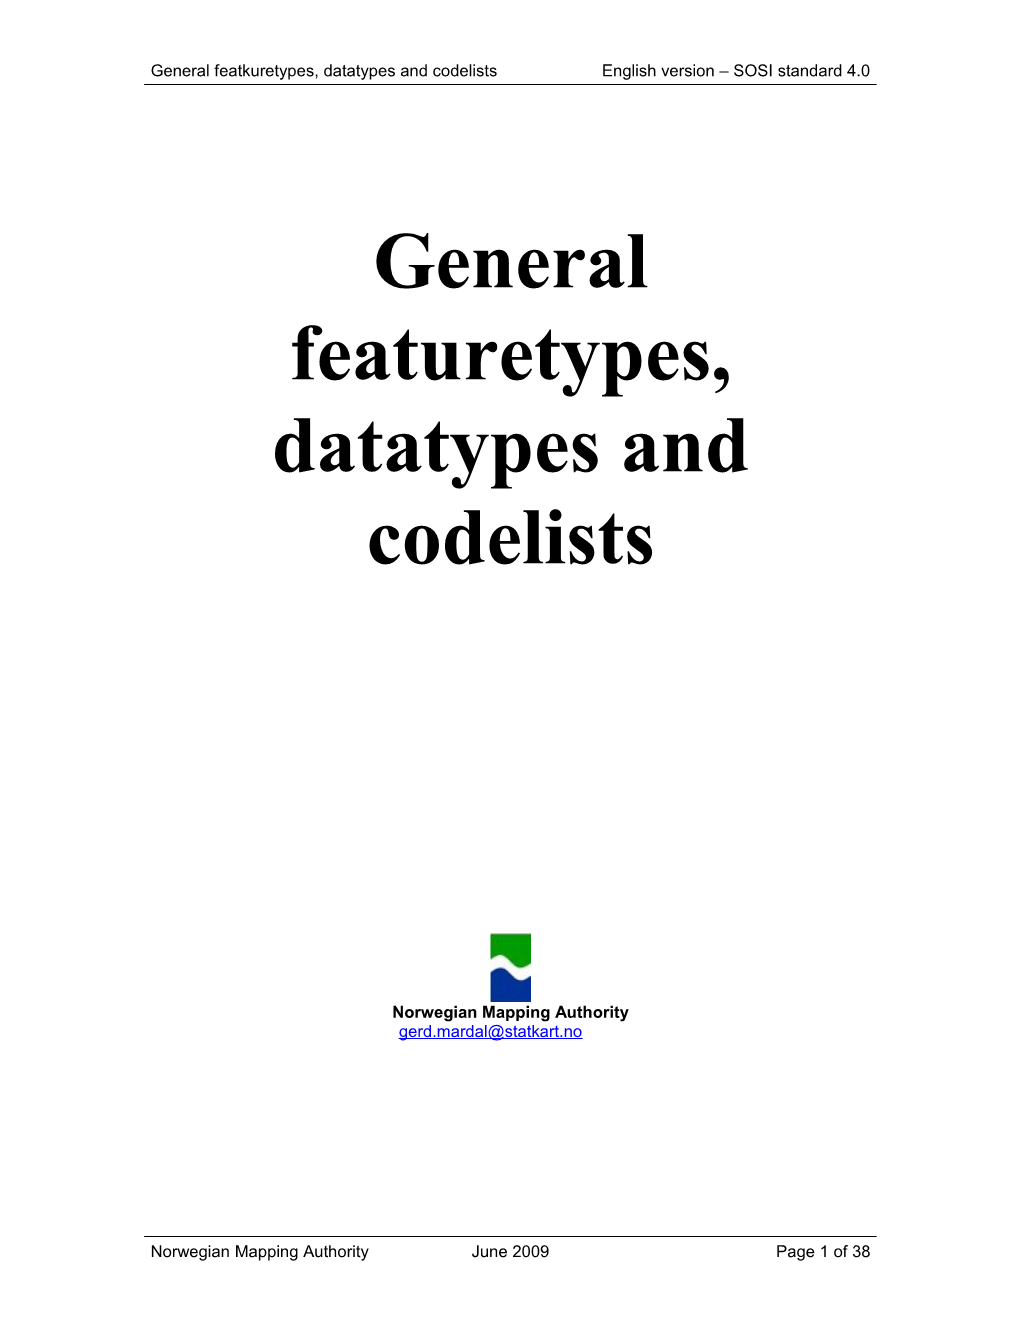 General Featuretypes, Datatypes and Codelists